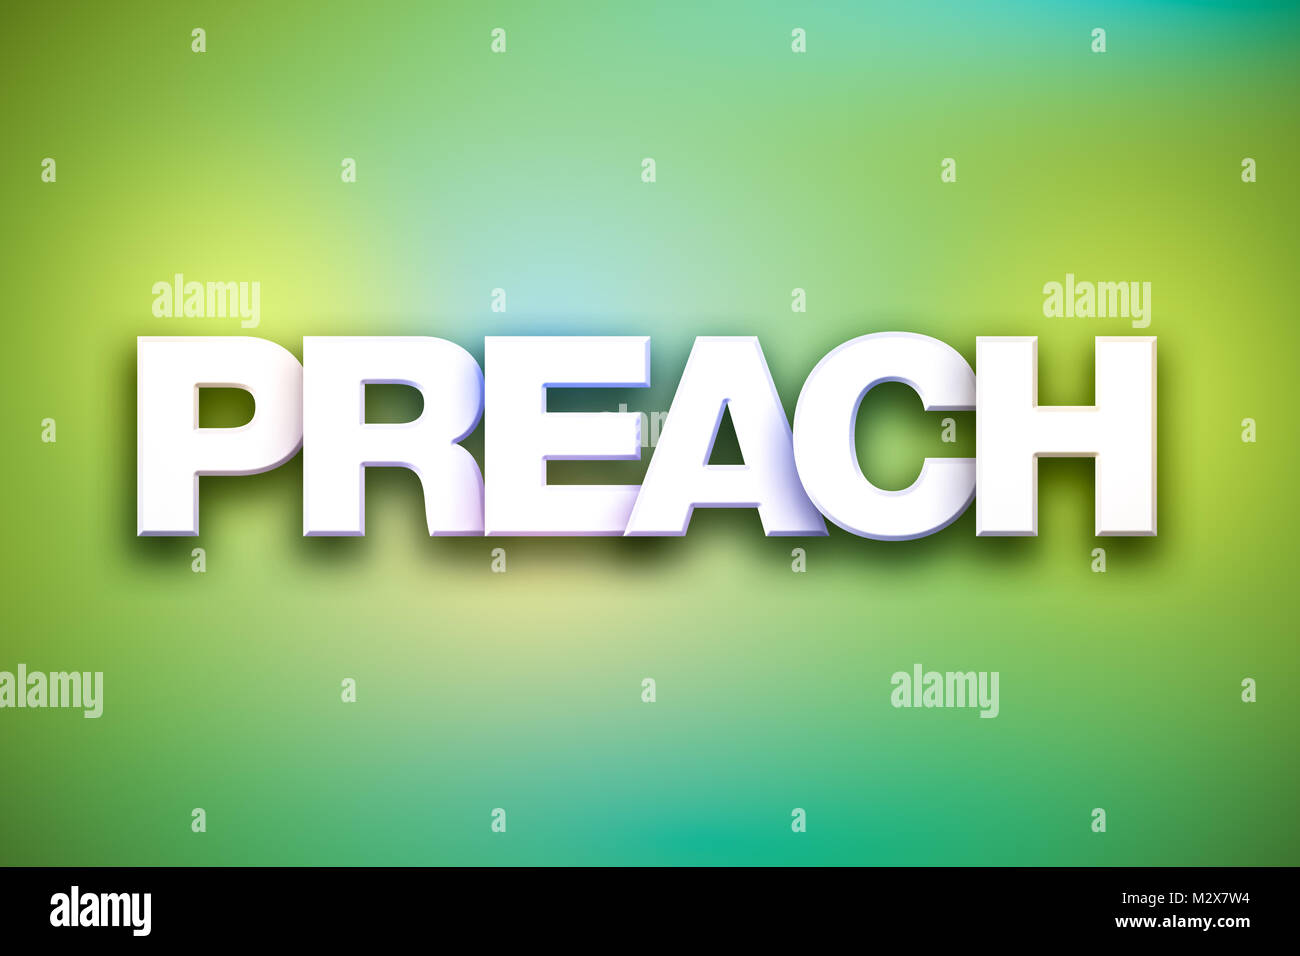 The word Preach concept written in white type on a colorful background. Stock Photo